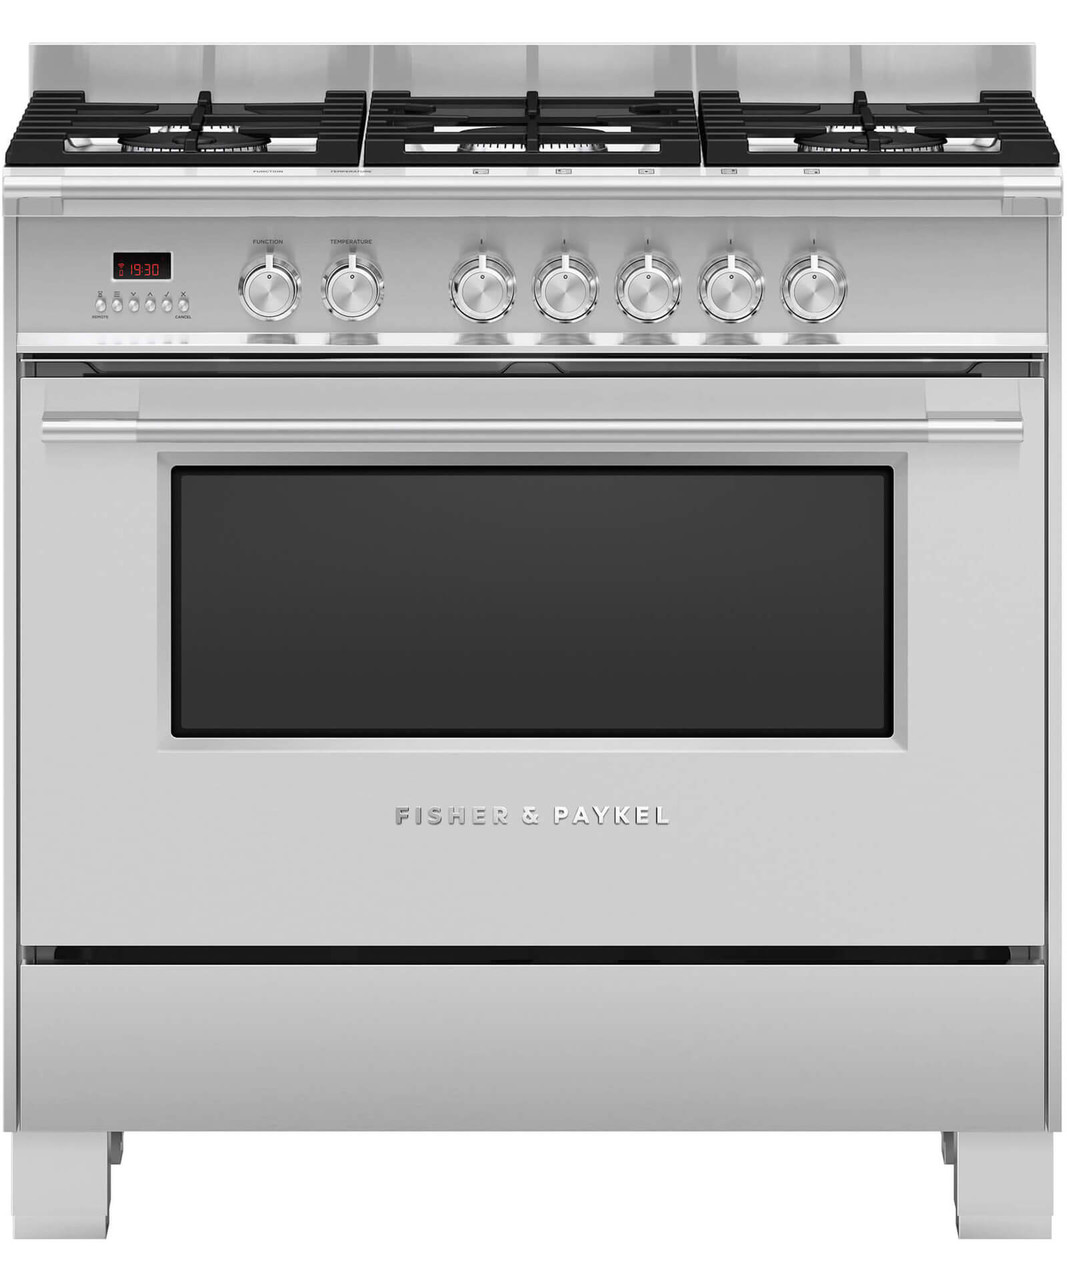 OR90SCG4X1 - 90cm Classic Style Freestanding Cooker - Stainless Steel